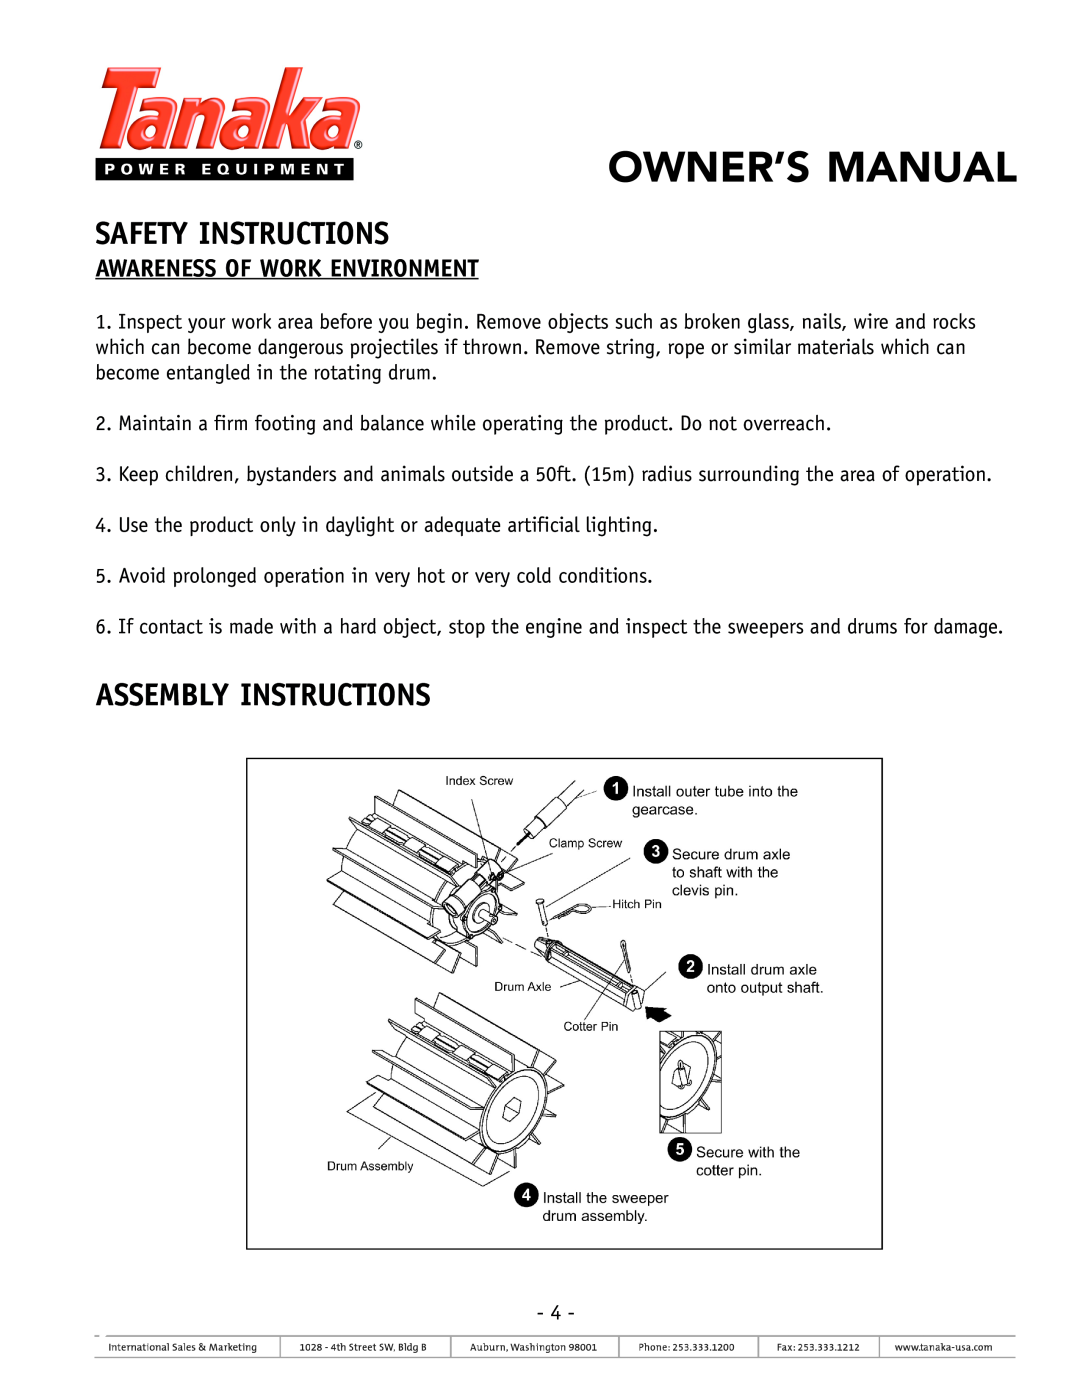 Tanaka TSW-210 owner manual Assembly Instructions, Awareness Of Work Environment, Safety Instructions 